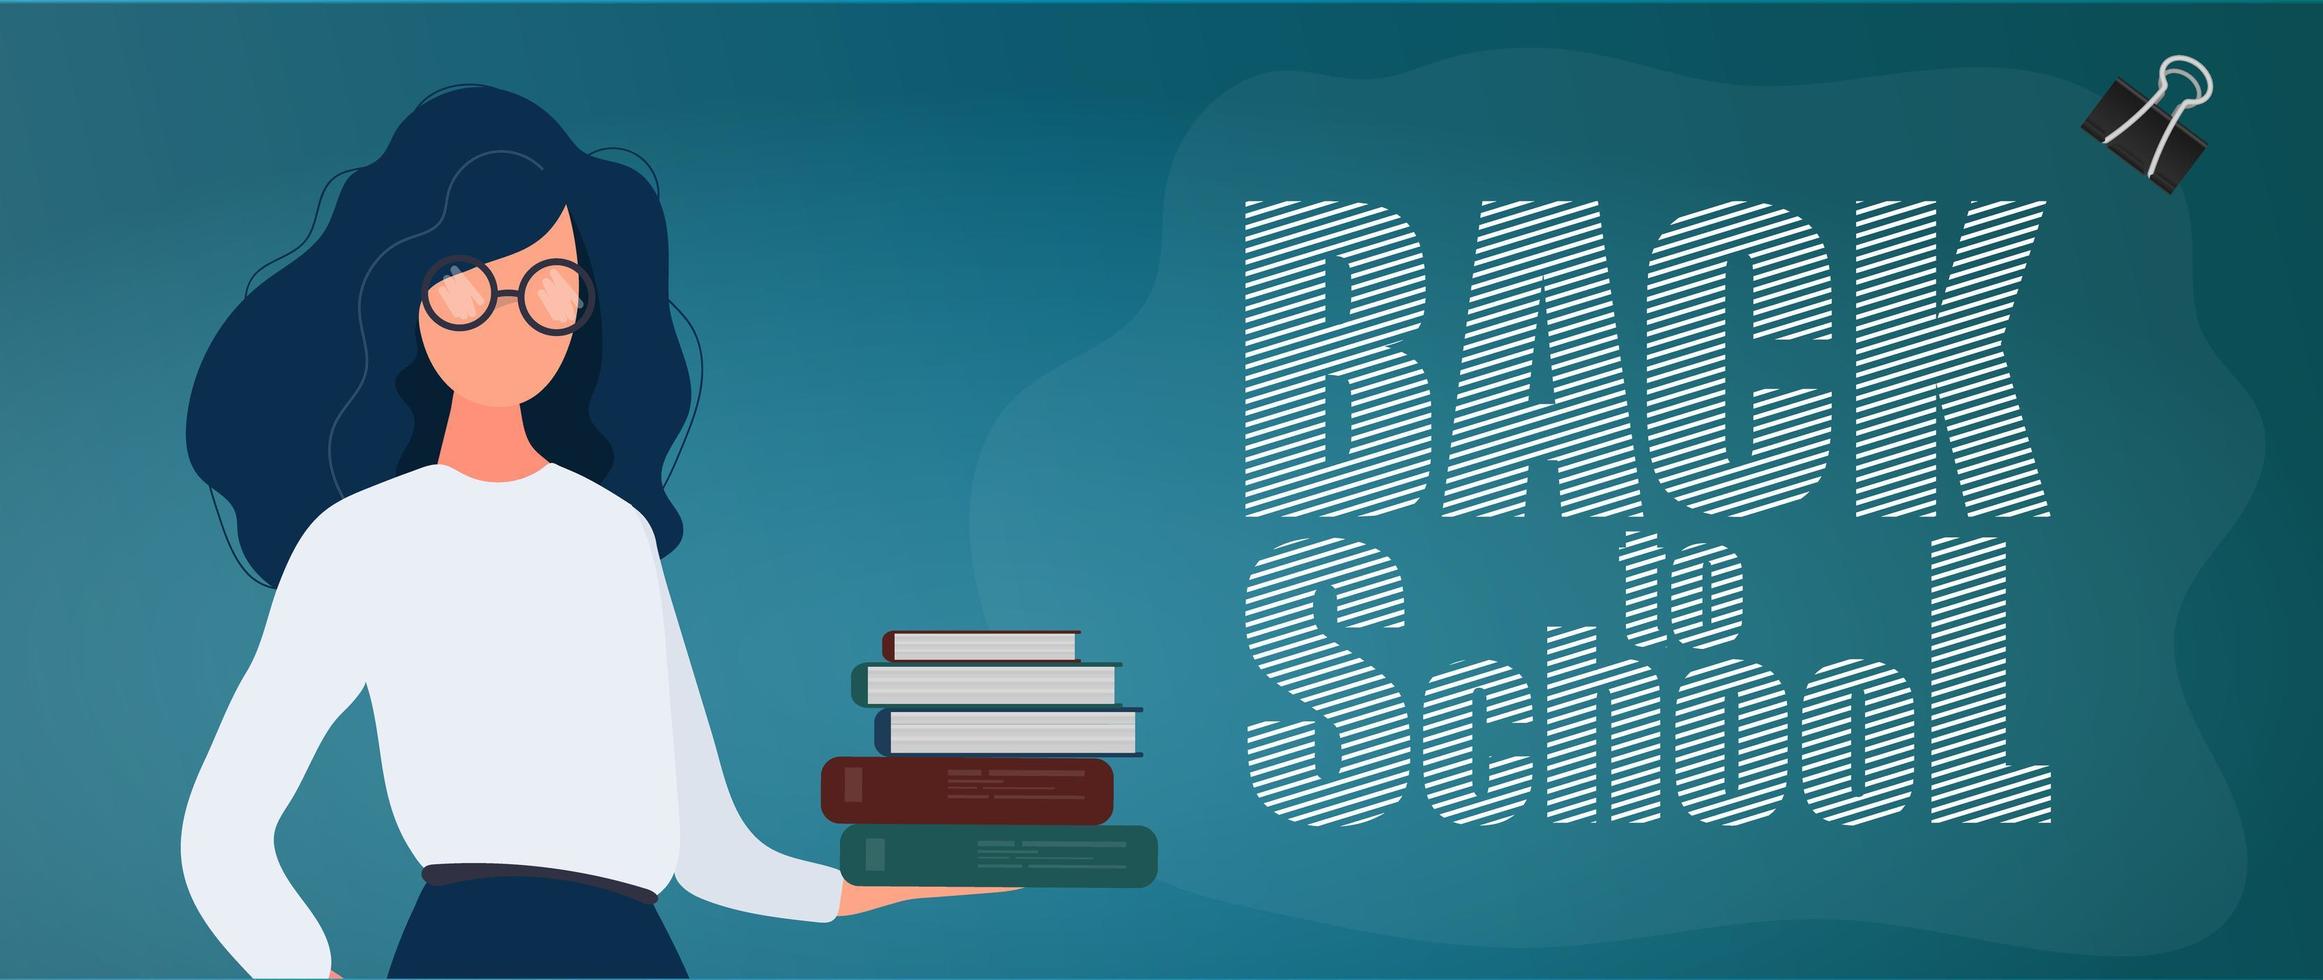 Back to school banner. A girl with glasses holds a stack of books. Stationery, leather scabbard, pens, pencils, felt-tip pens, rulers. Concept for the start of the school season. Vector. vector